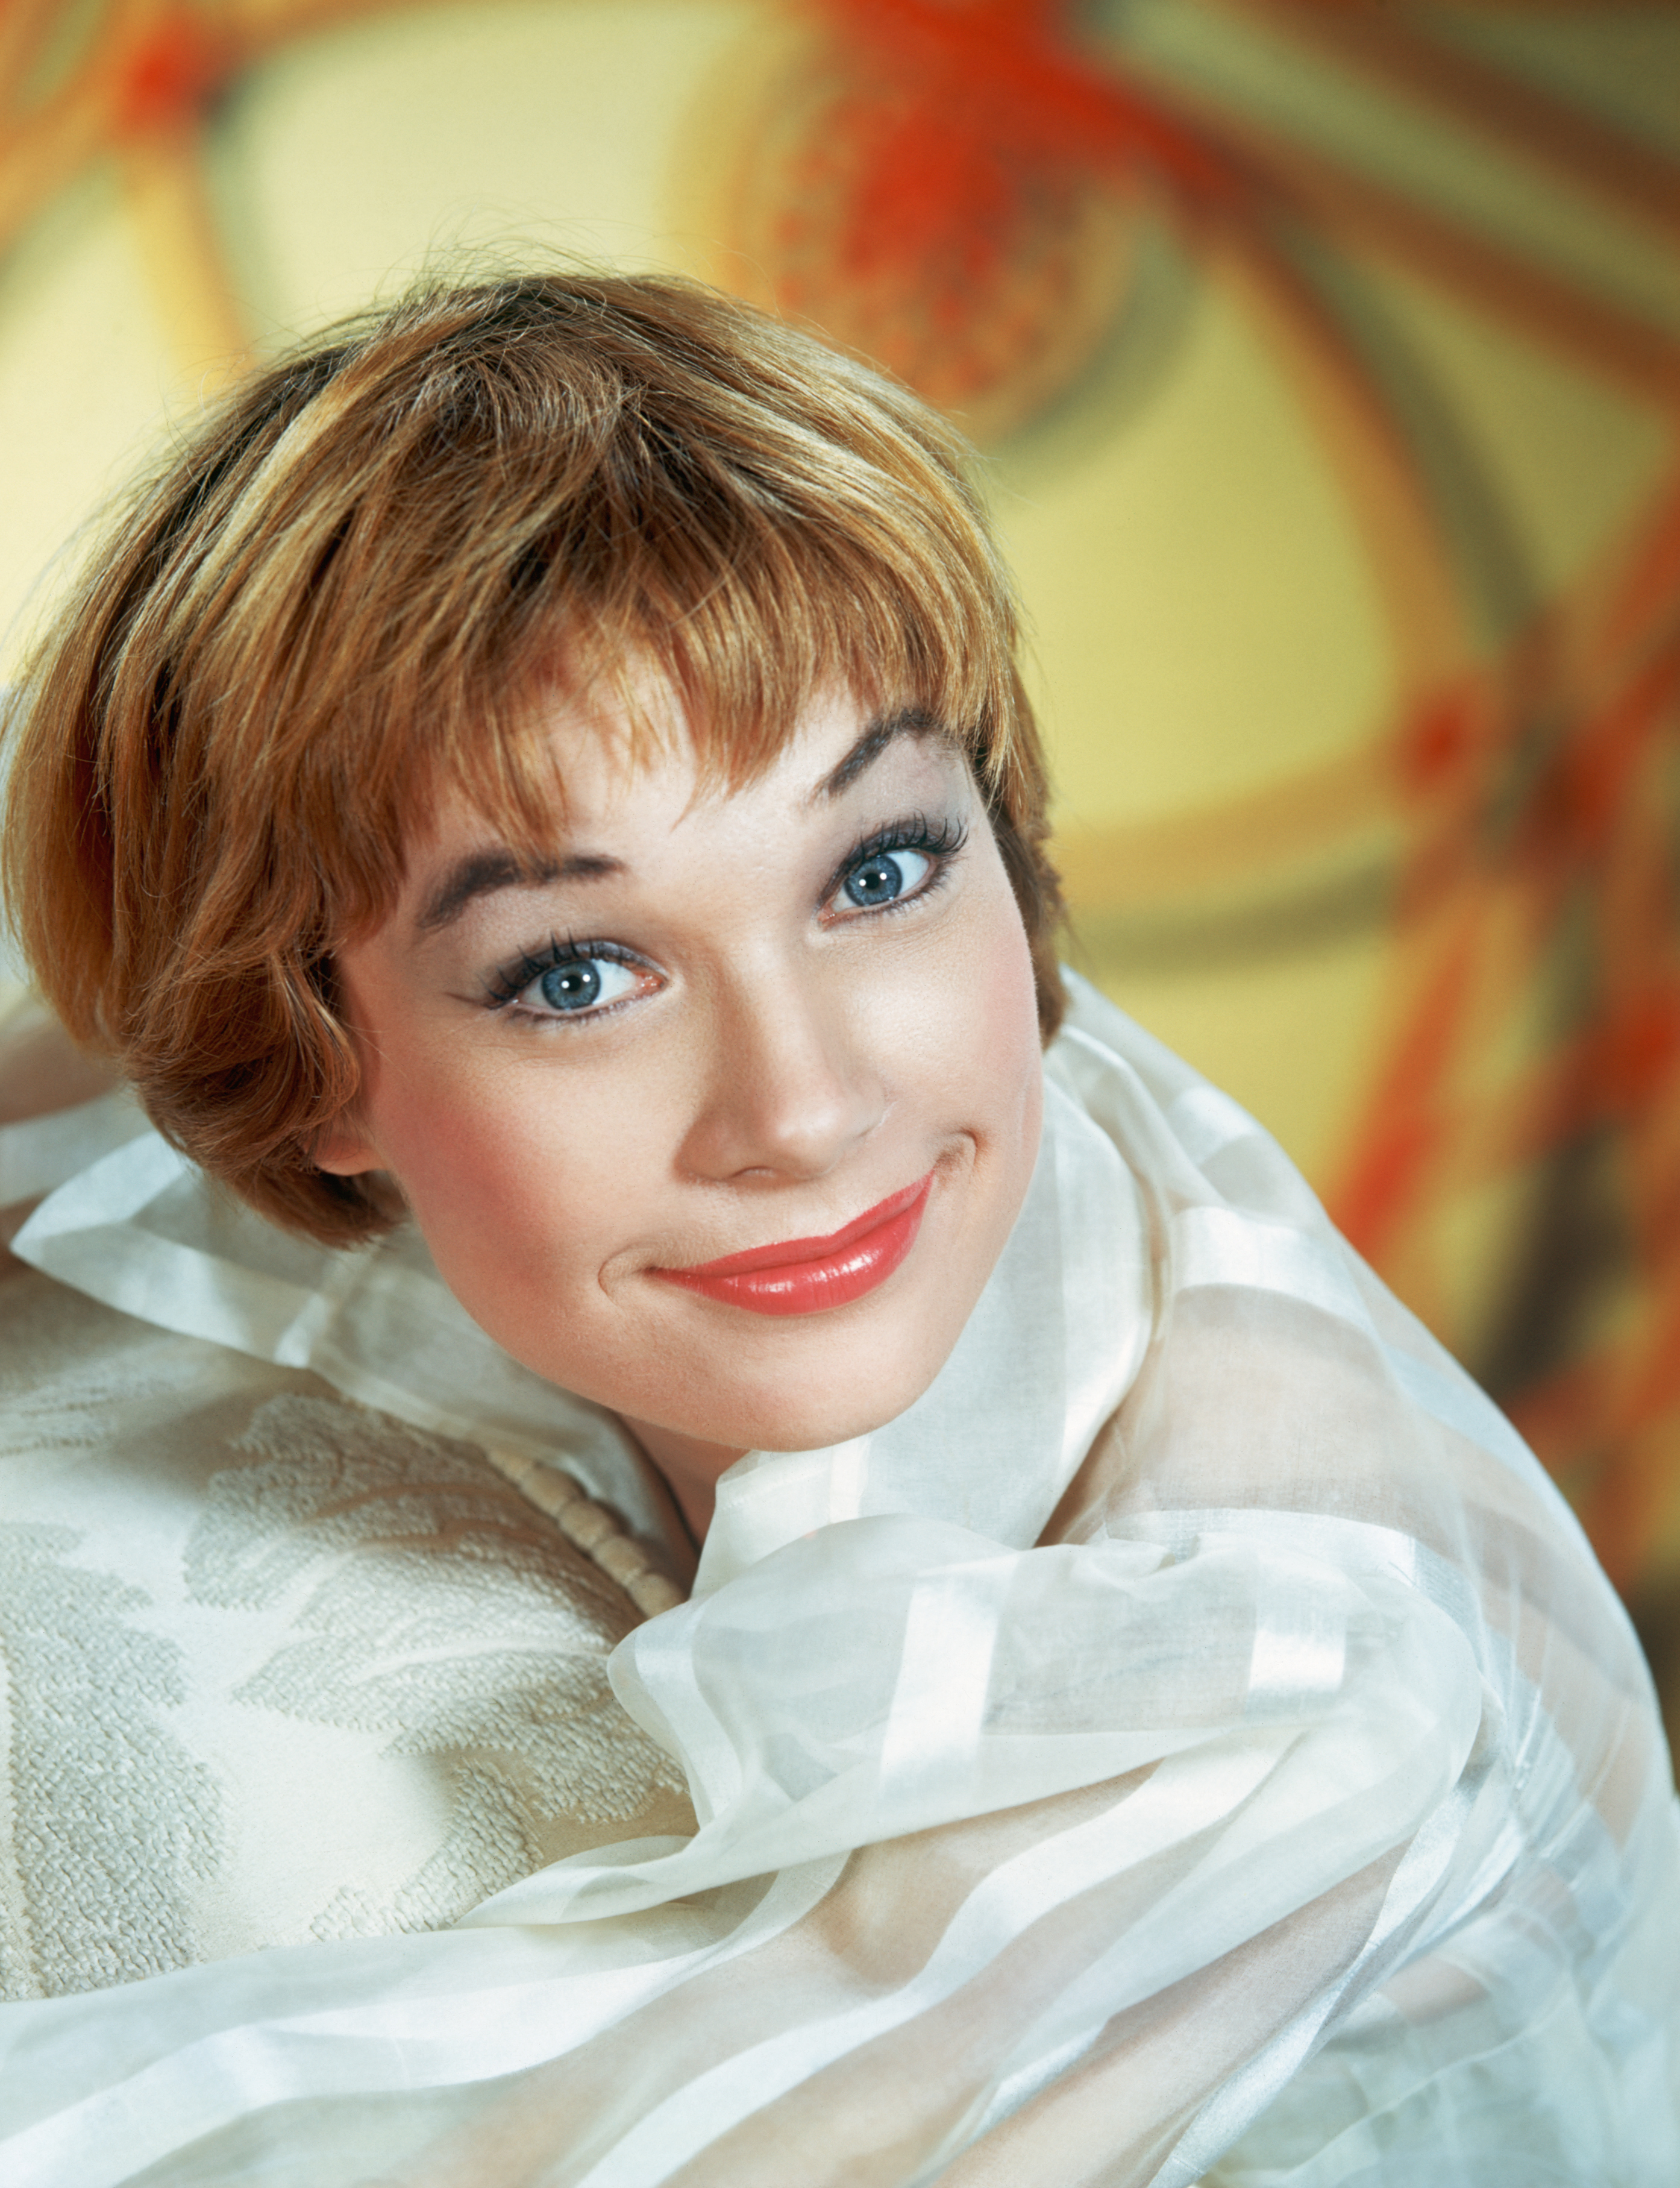 Shirley MacLaine for "Some Came Running" circa 1959 | Source: Getty Images